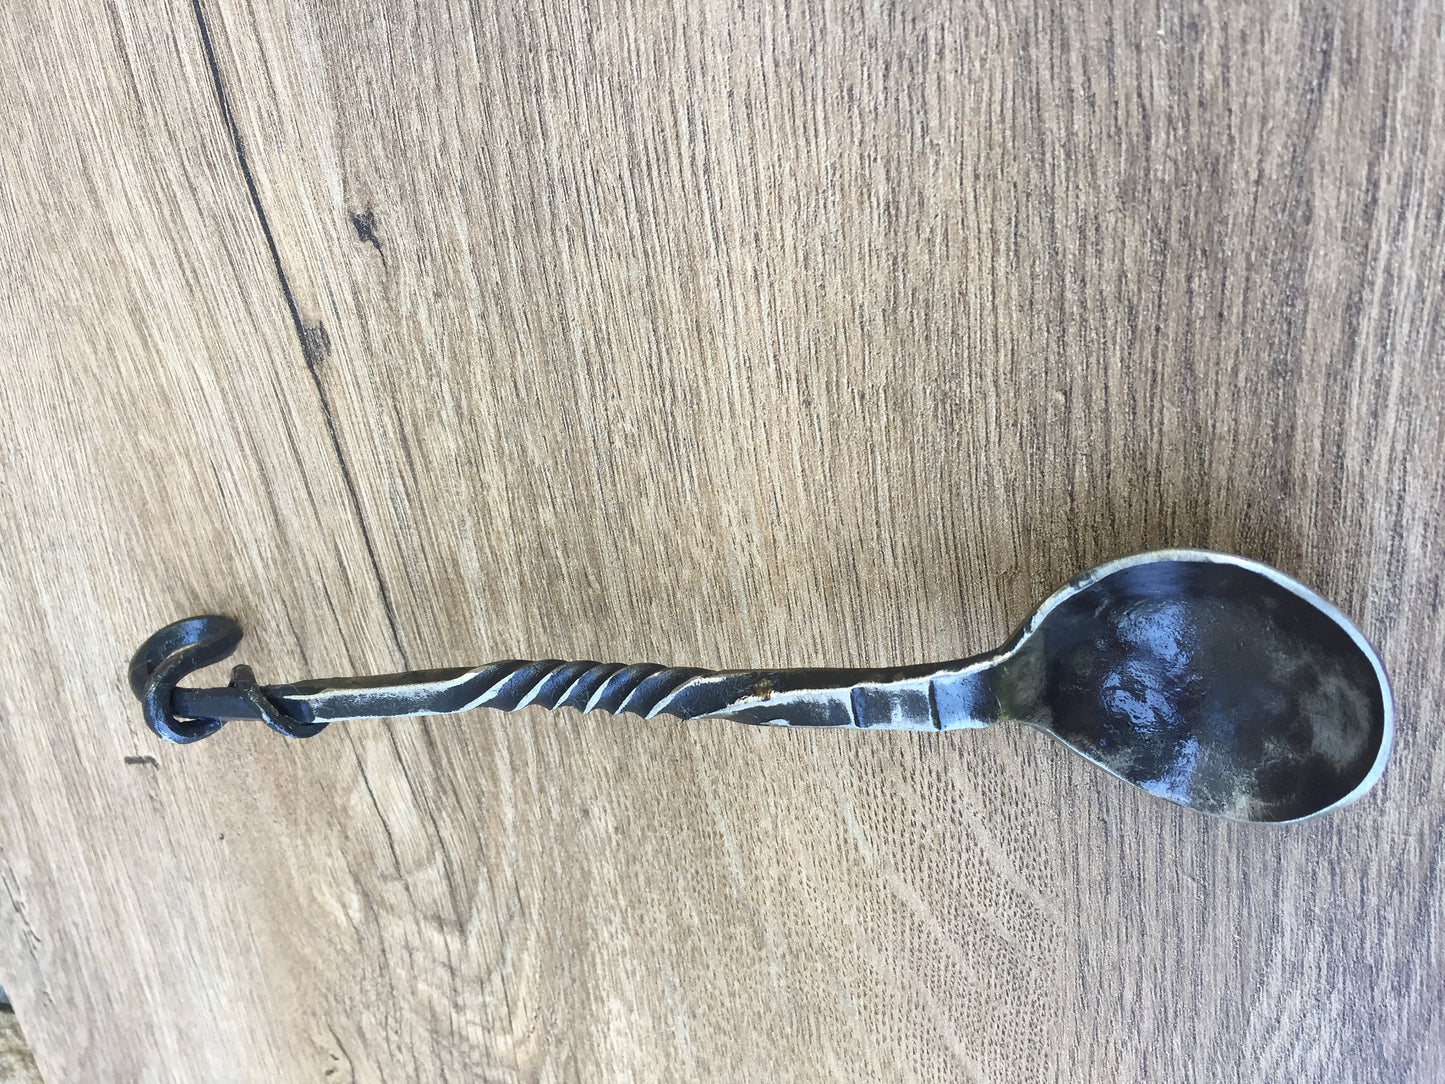 Viking spoon, medieval cutlery, hand forged spoon, rustic spoon, medieval spoon,middle ages spoon,BBQ gifts,dining appliances,forged cutlery